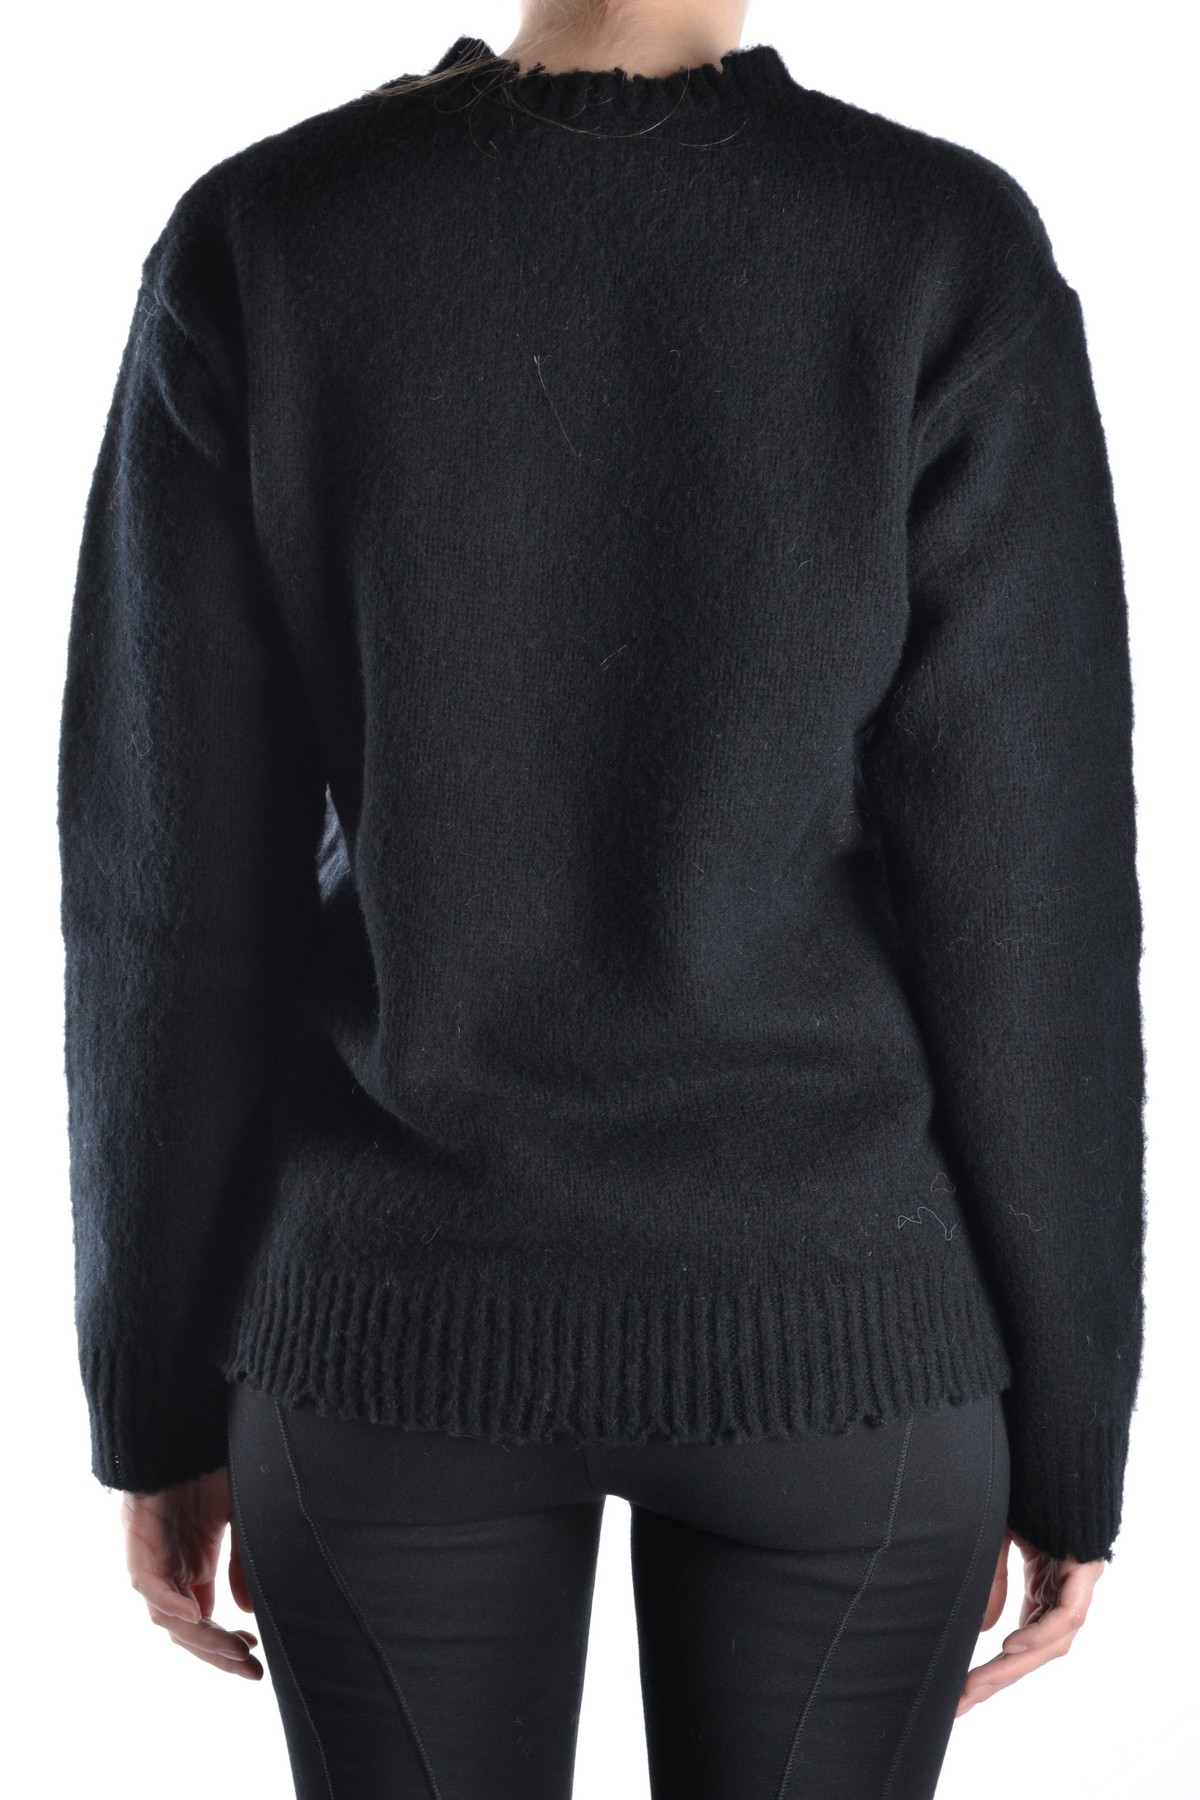 Alexander Wang Sweaters and Cardigans | luxlet.com